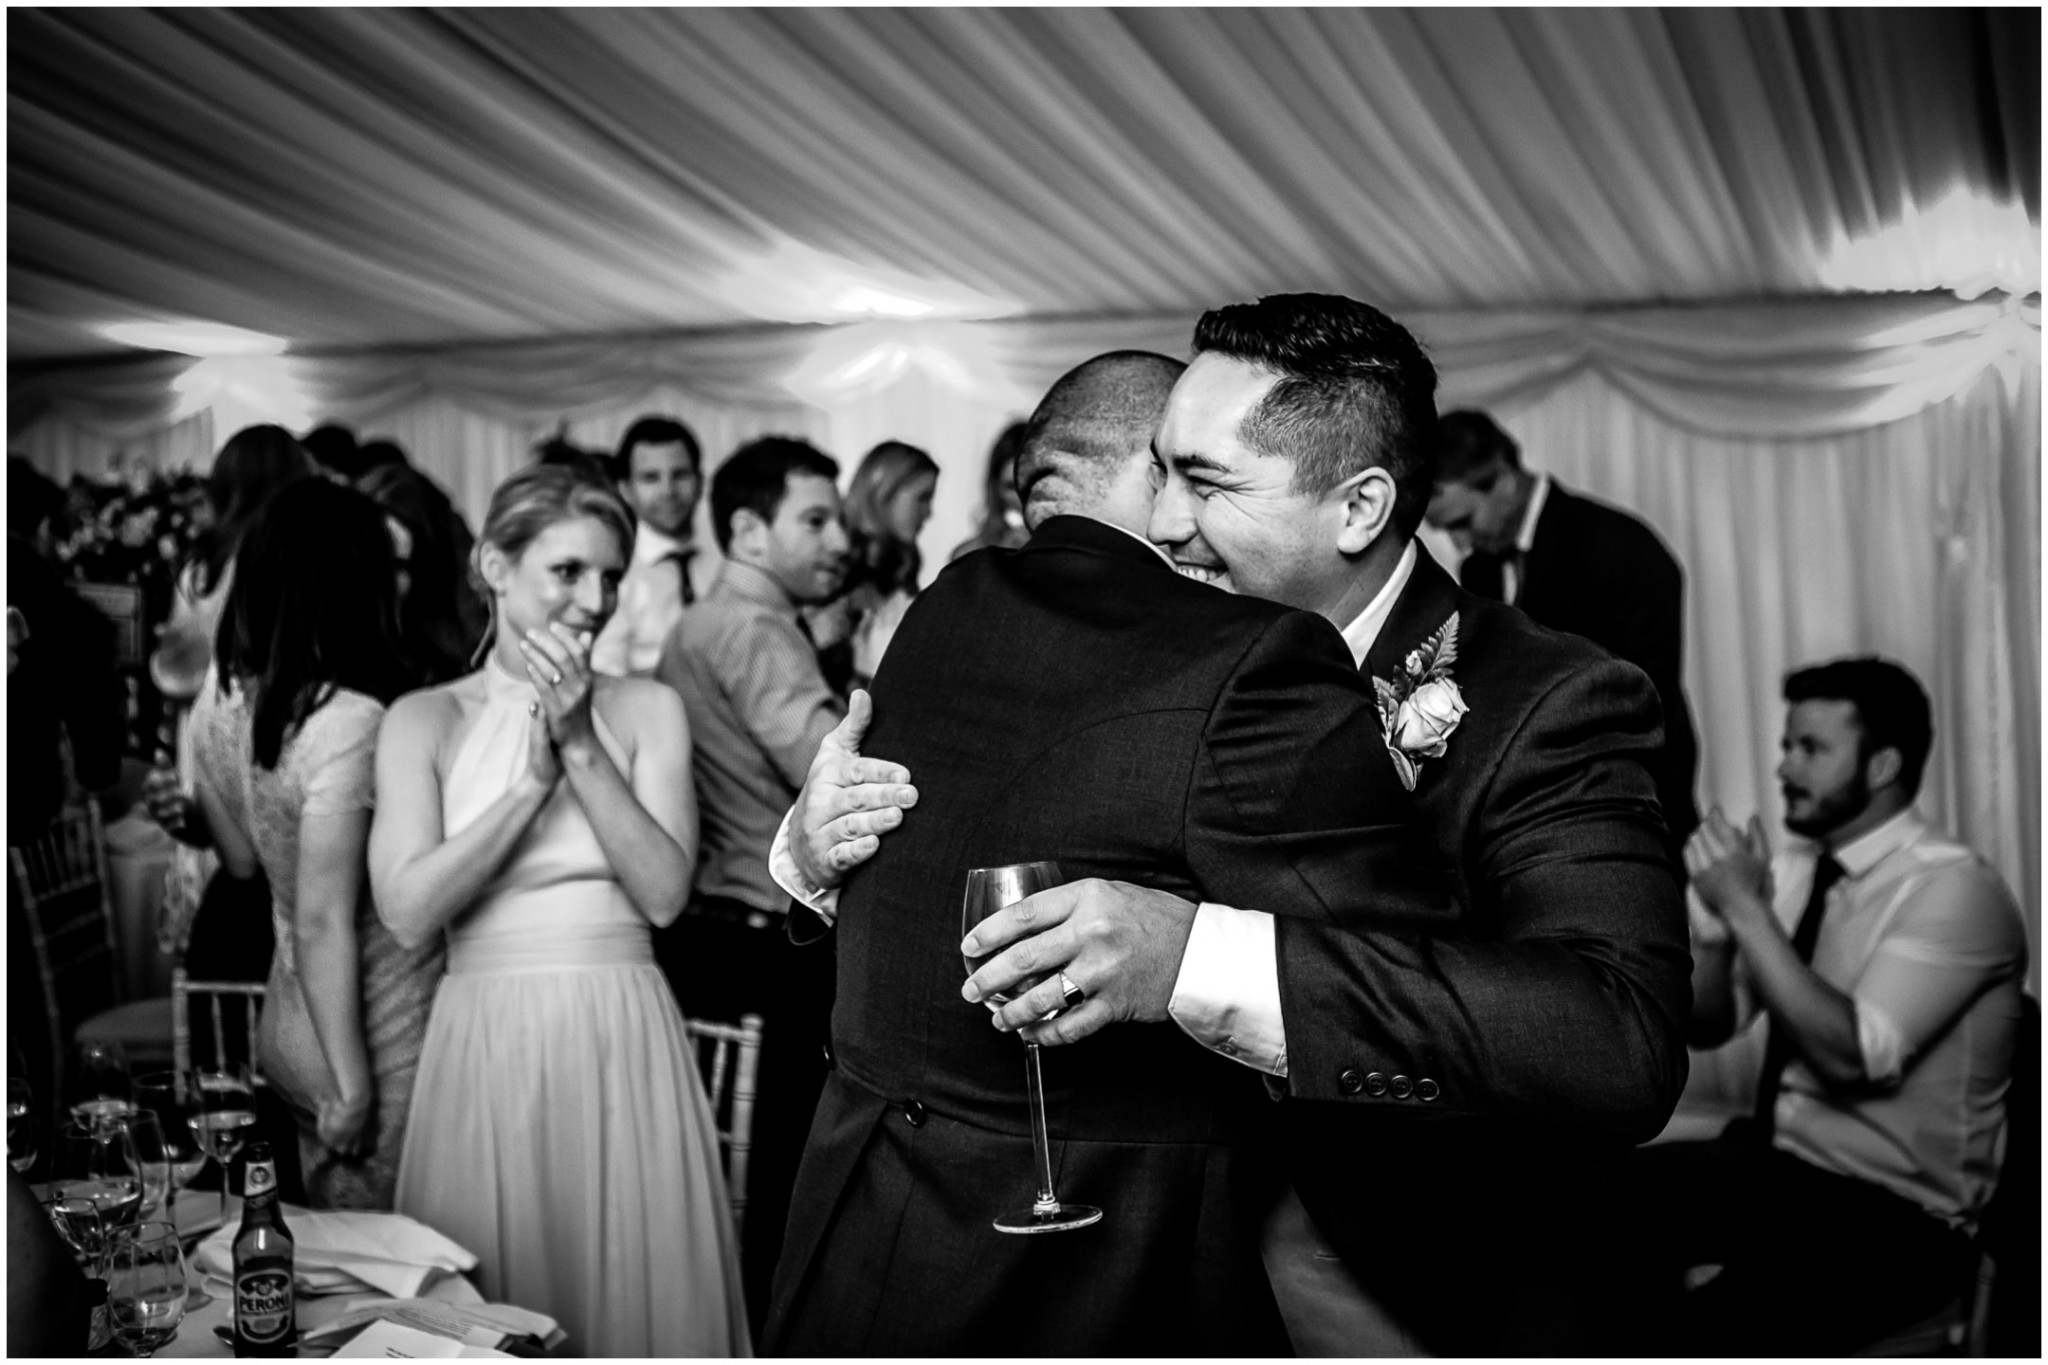 dulwich-picture-gallery-wedding-photography-073